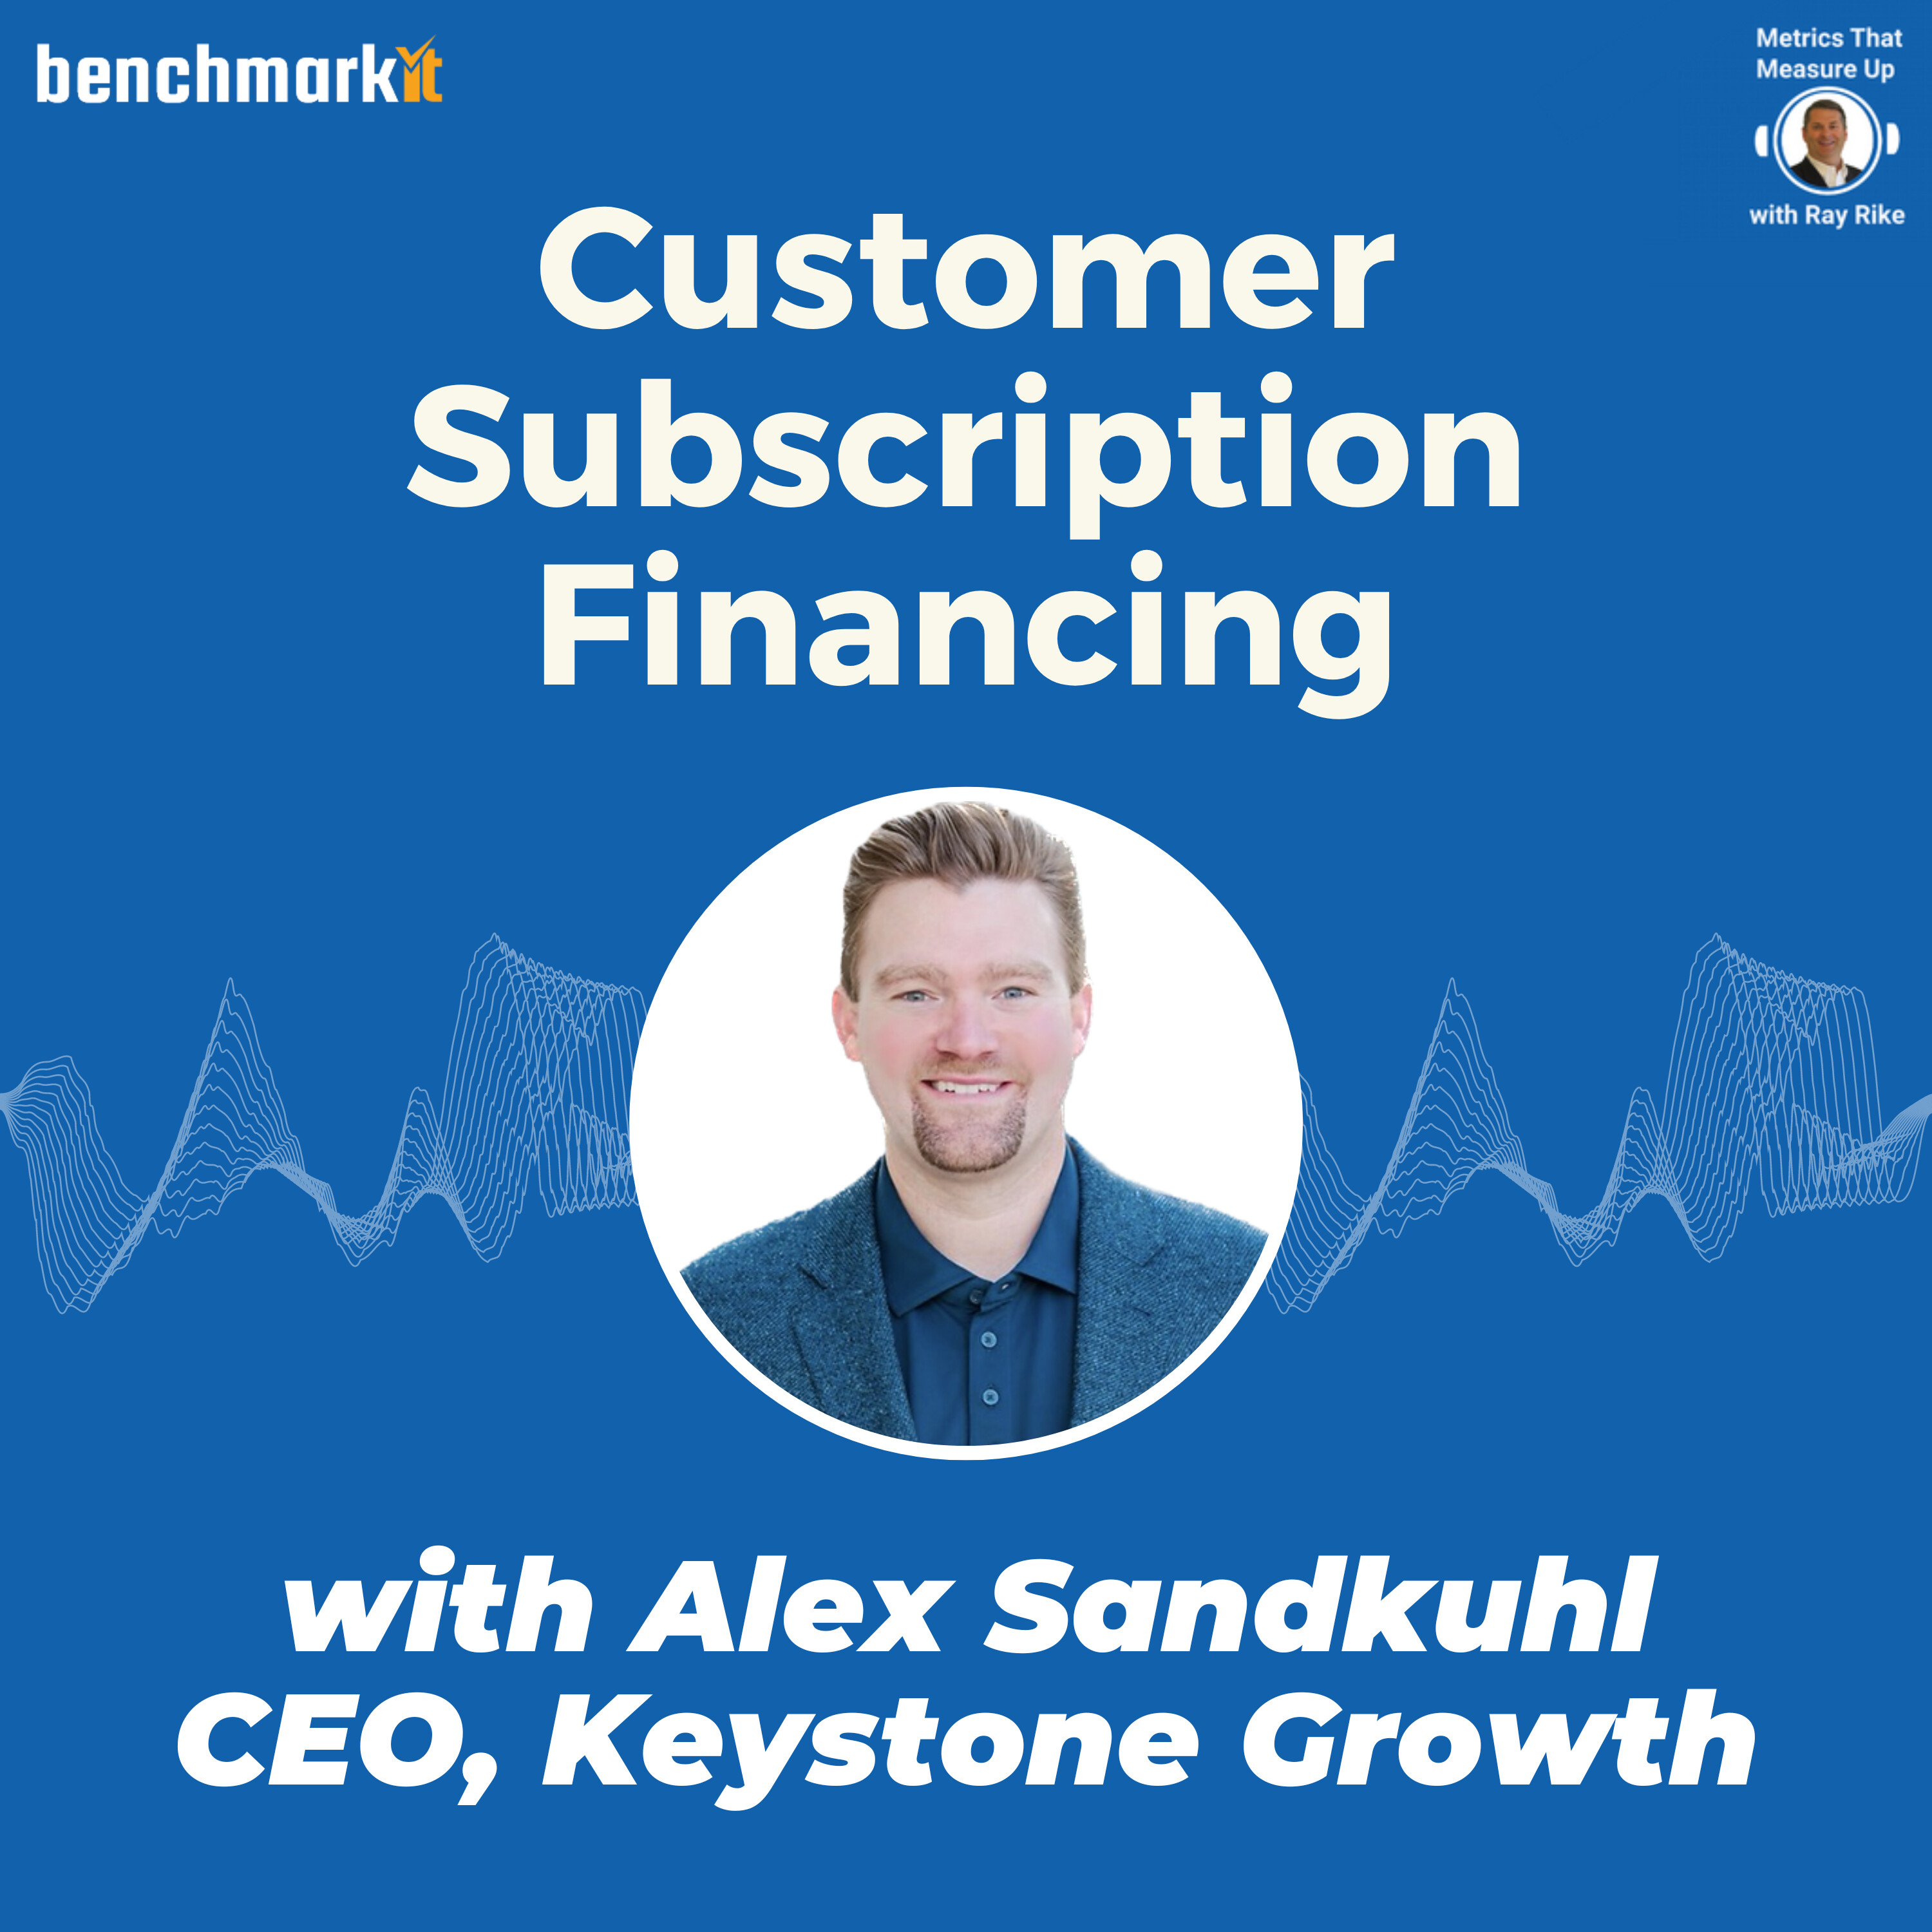 Customer Subscription Financing - with Alex Sandkuhl, Founder and CEO Keystone Growth